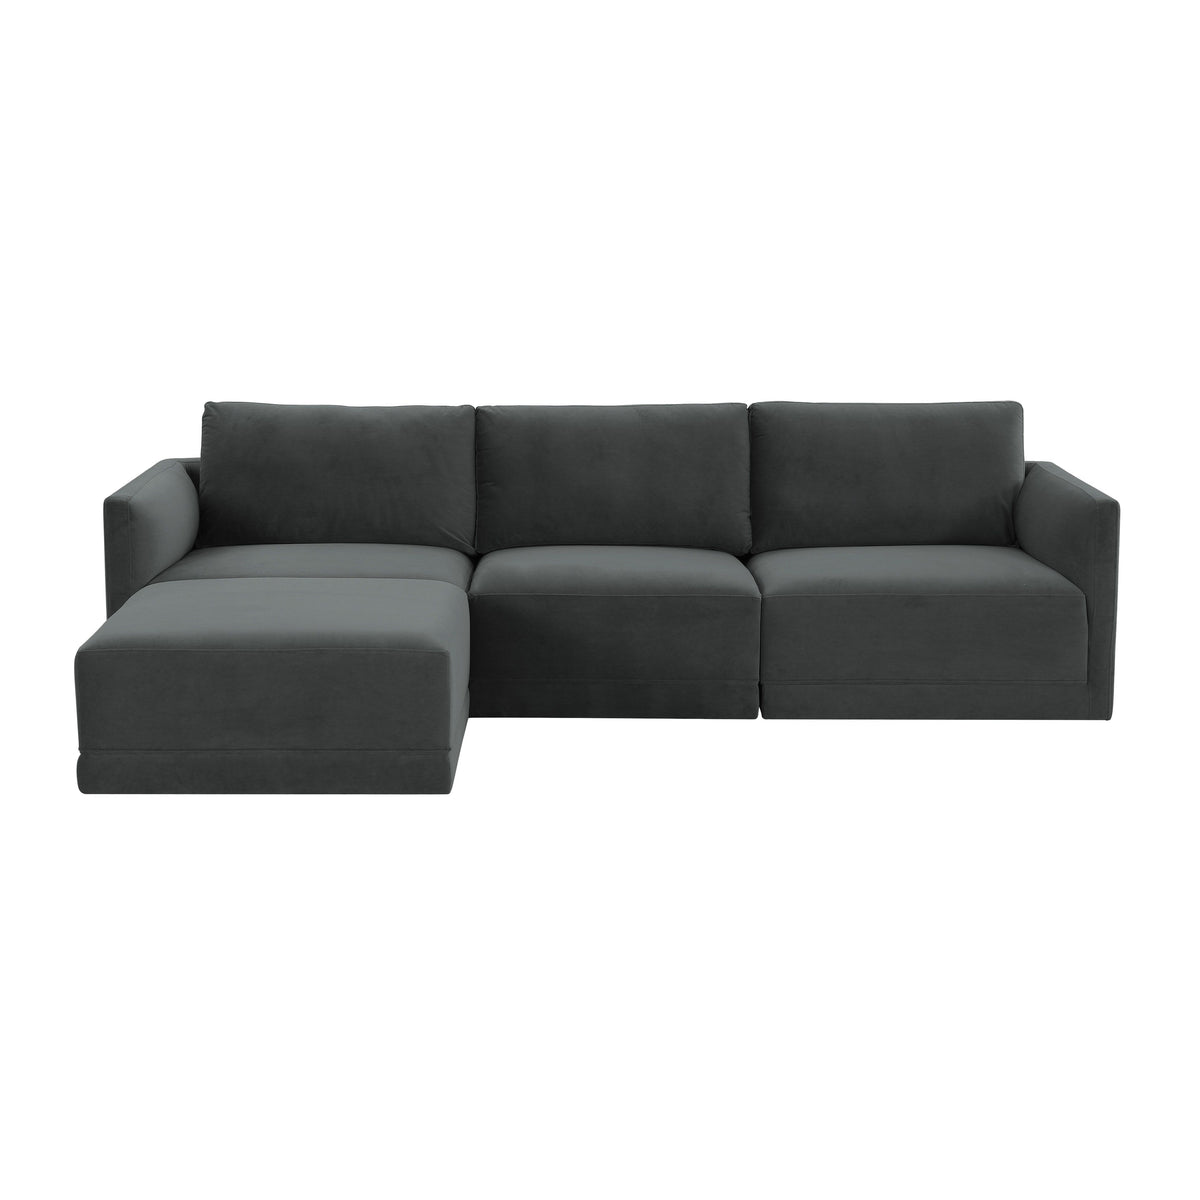 Valentina Charcoal Velvet Modular Sectional Sofa - Luxury Living Collection